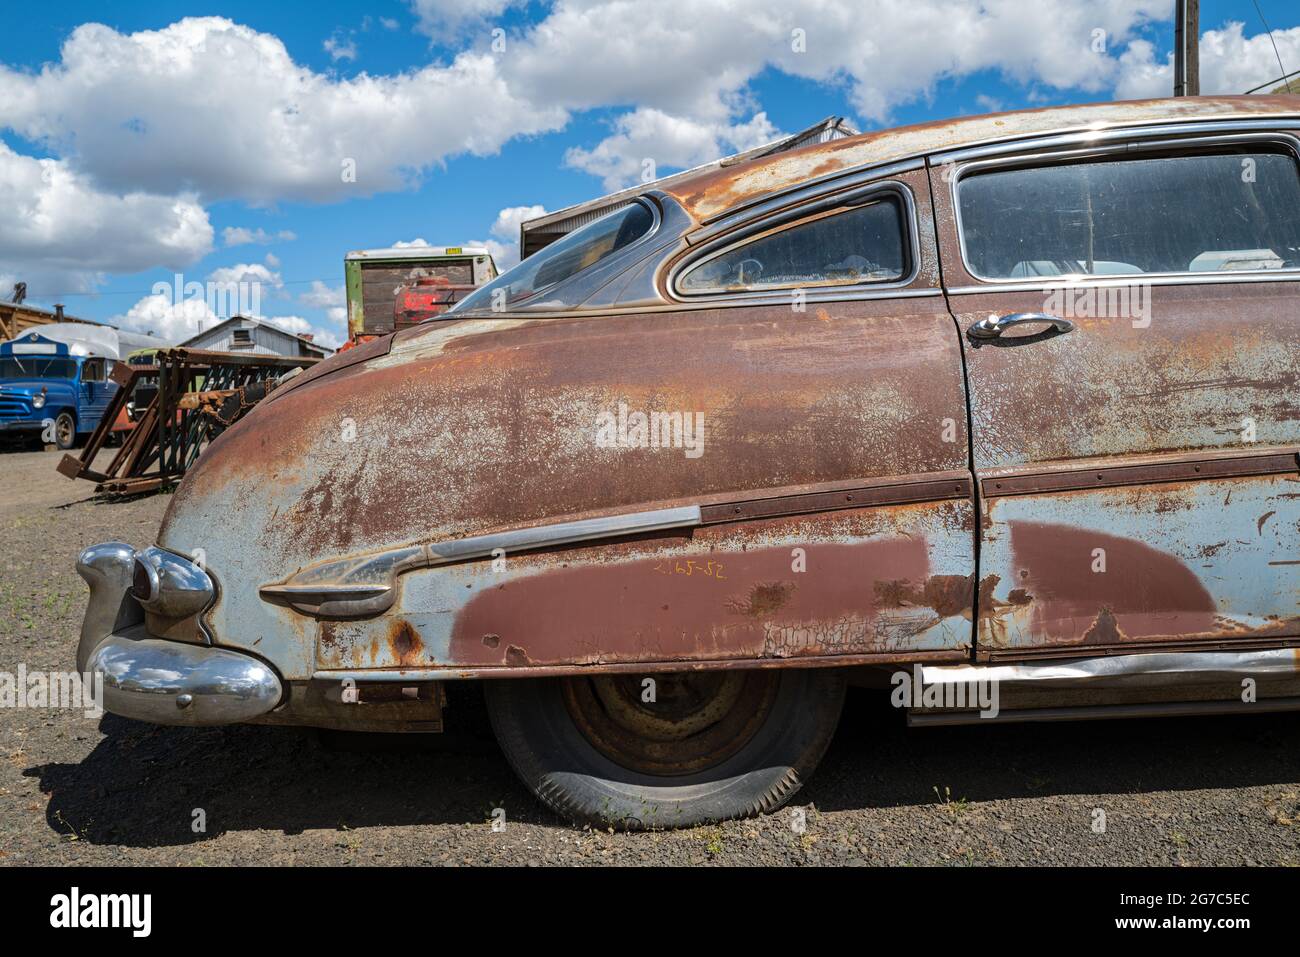 The rear door and quarter panel of a 1952 Hudson Commodore 8 car in Pomeroy, Washington, USA Stock Photo